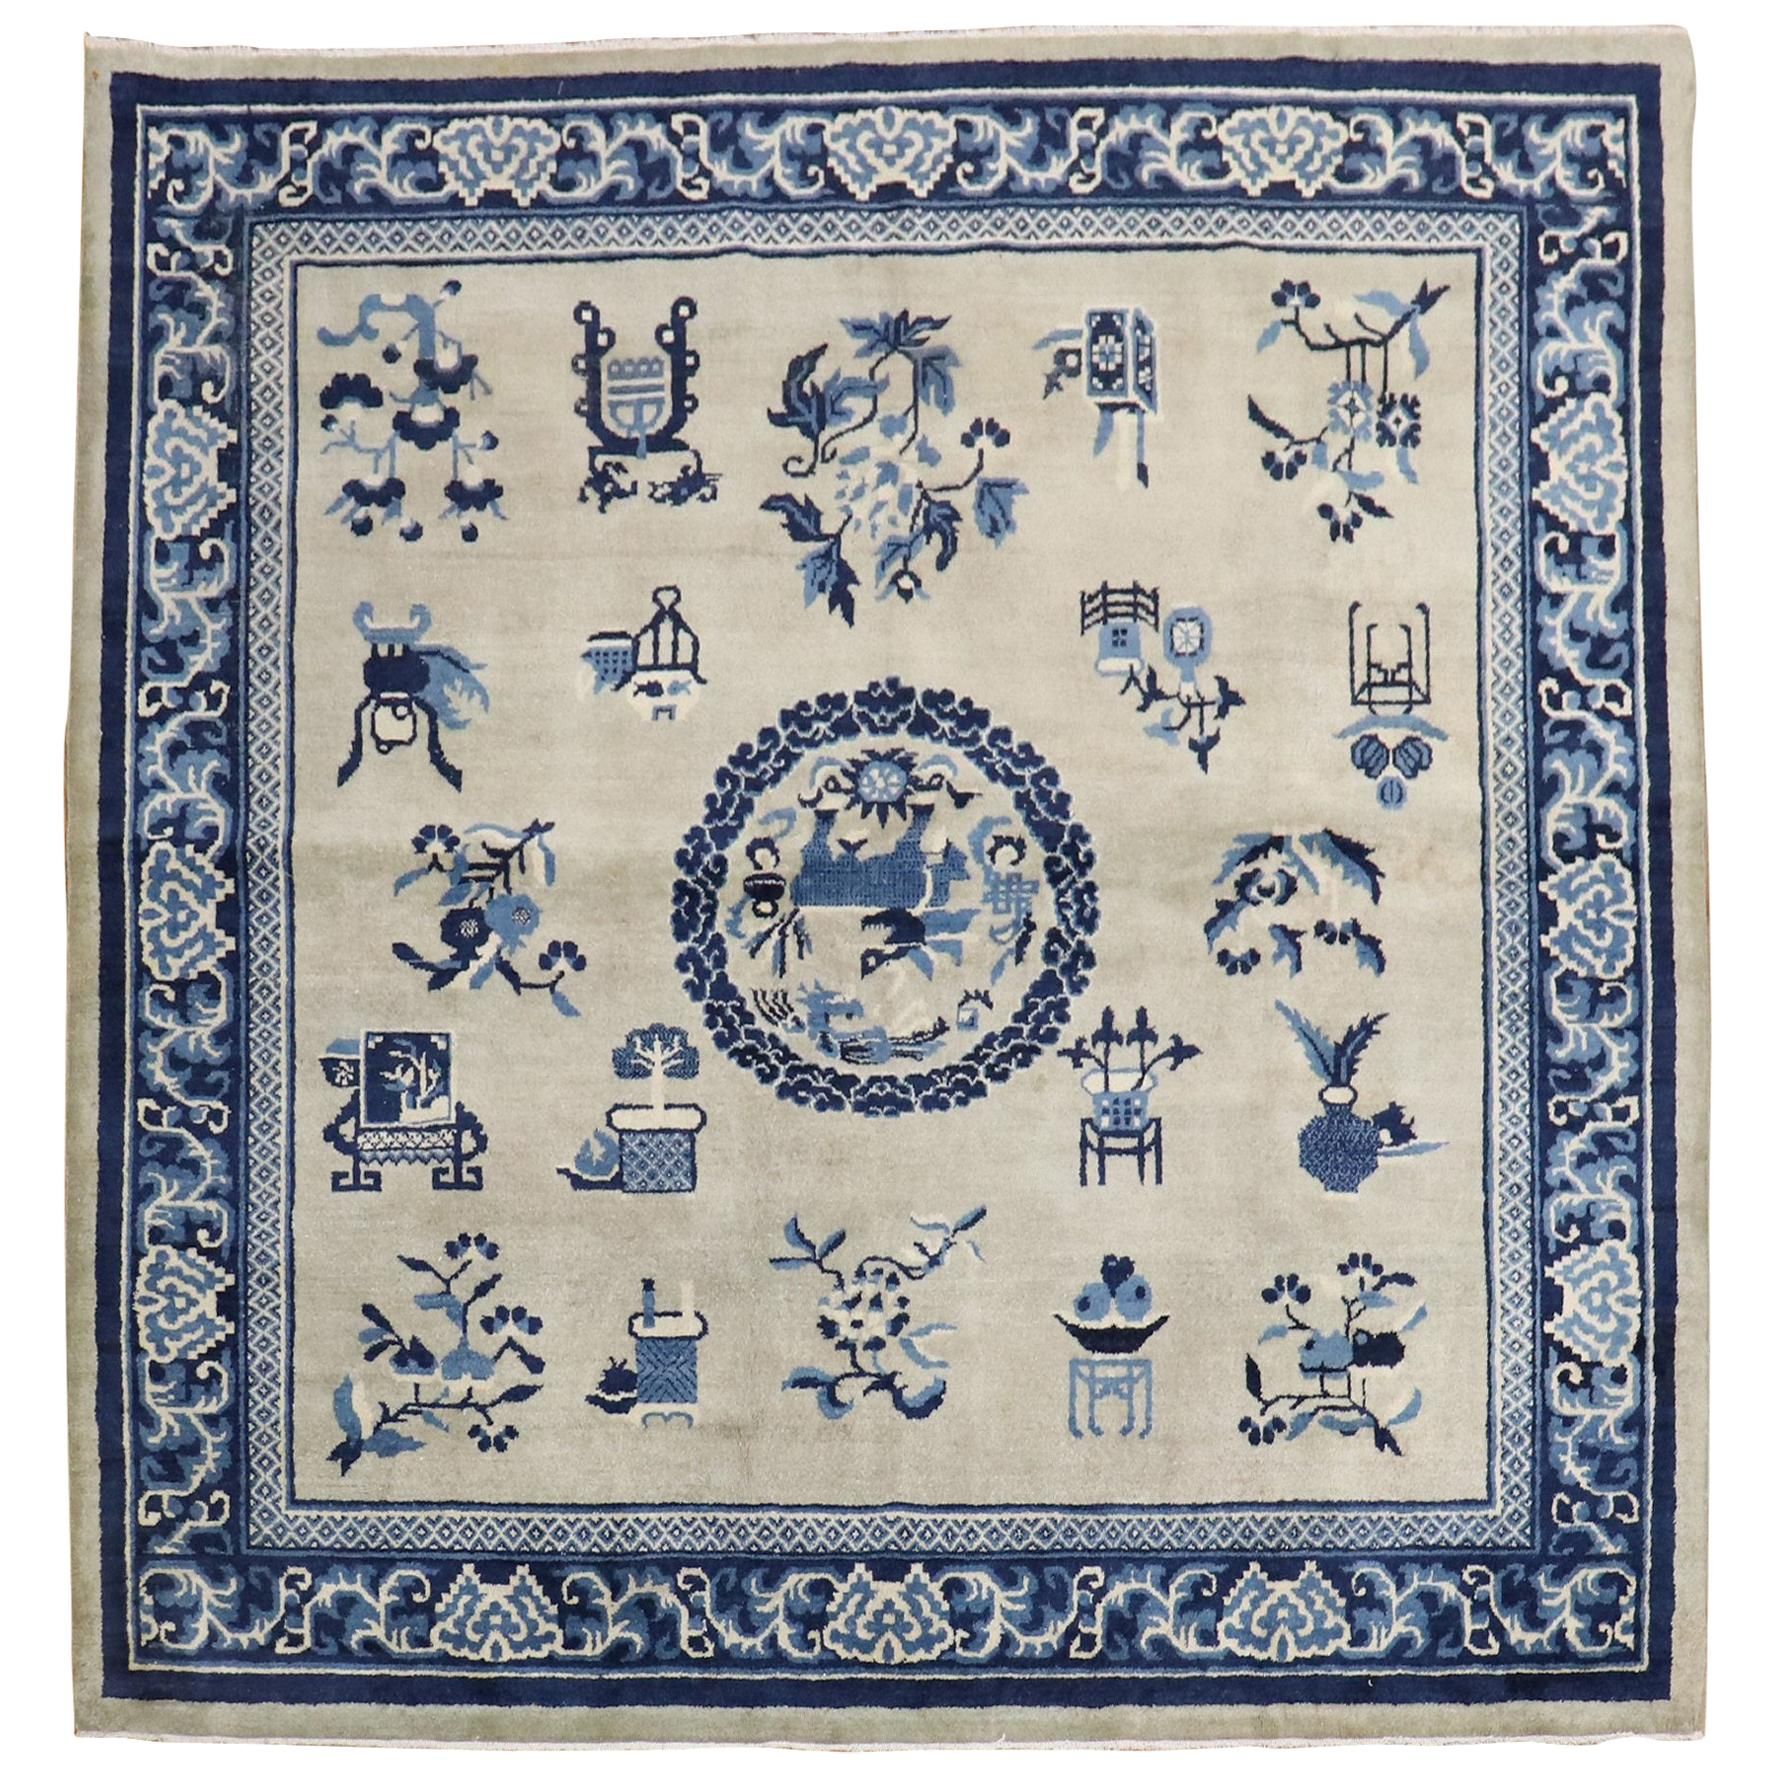 Slate Blue Chinese Square Rug For Sale At 1Stdibs | China Square Carpets,  Pekin Napkin Artist Throughout Blue Square Rugs (View 14 of 15)